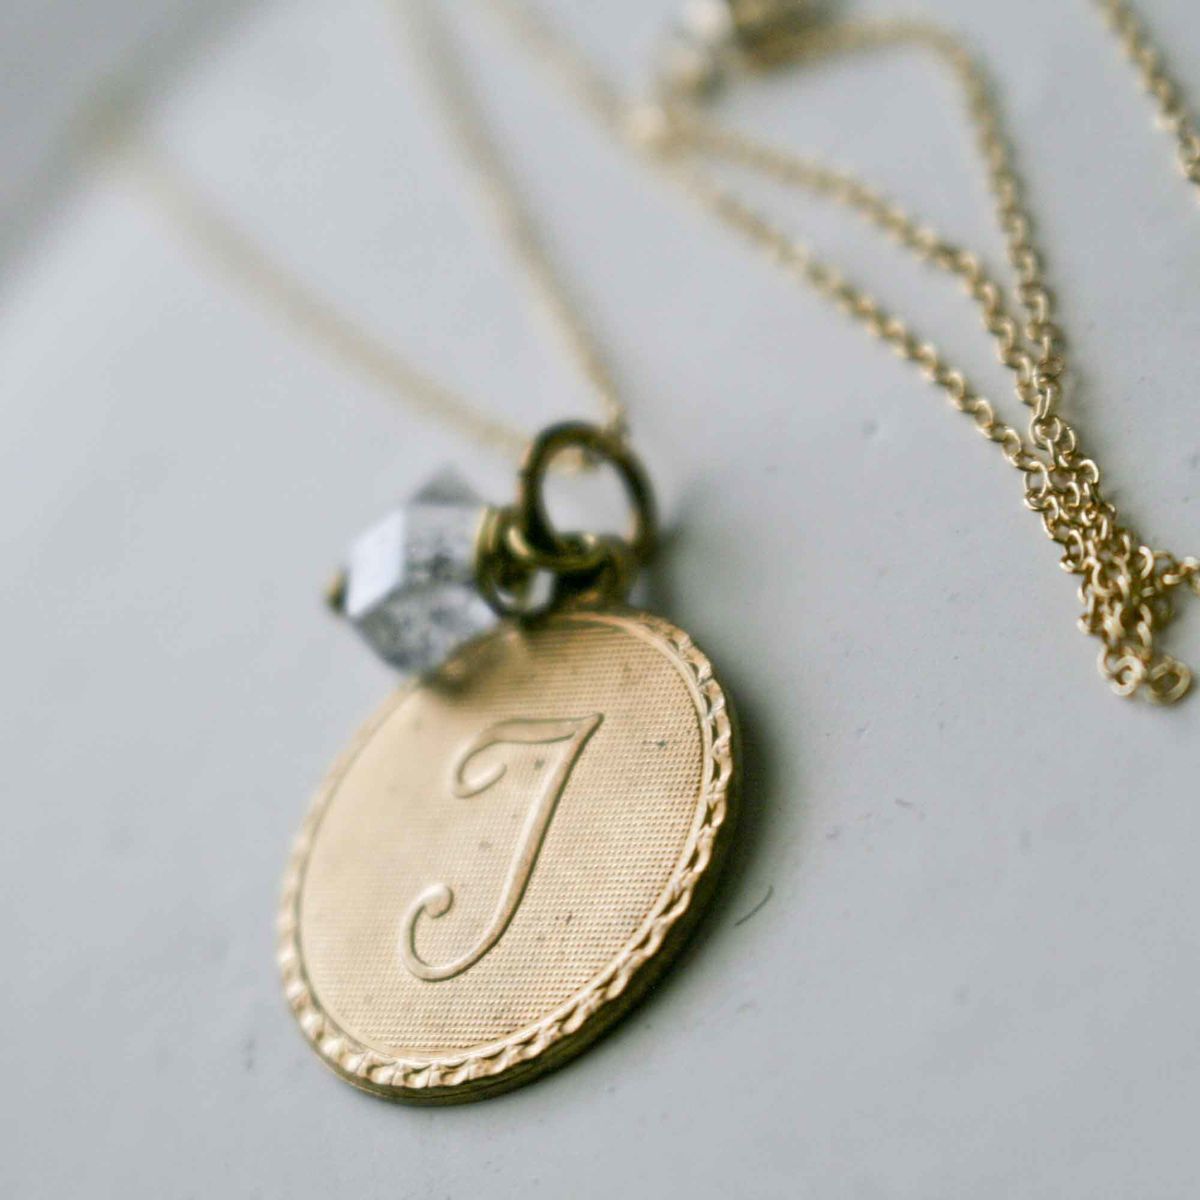 Uppercase Cursive Initial Monogram Letter Round Disc Charm Necklace Inside Latest Letter O Alphabet Locket Element Necklaces (View 5 of 26)